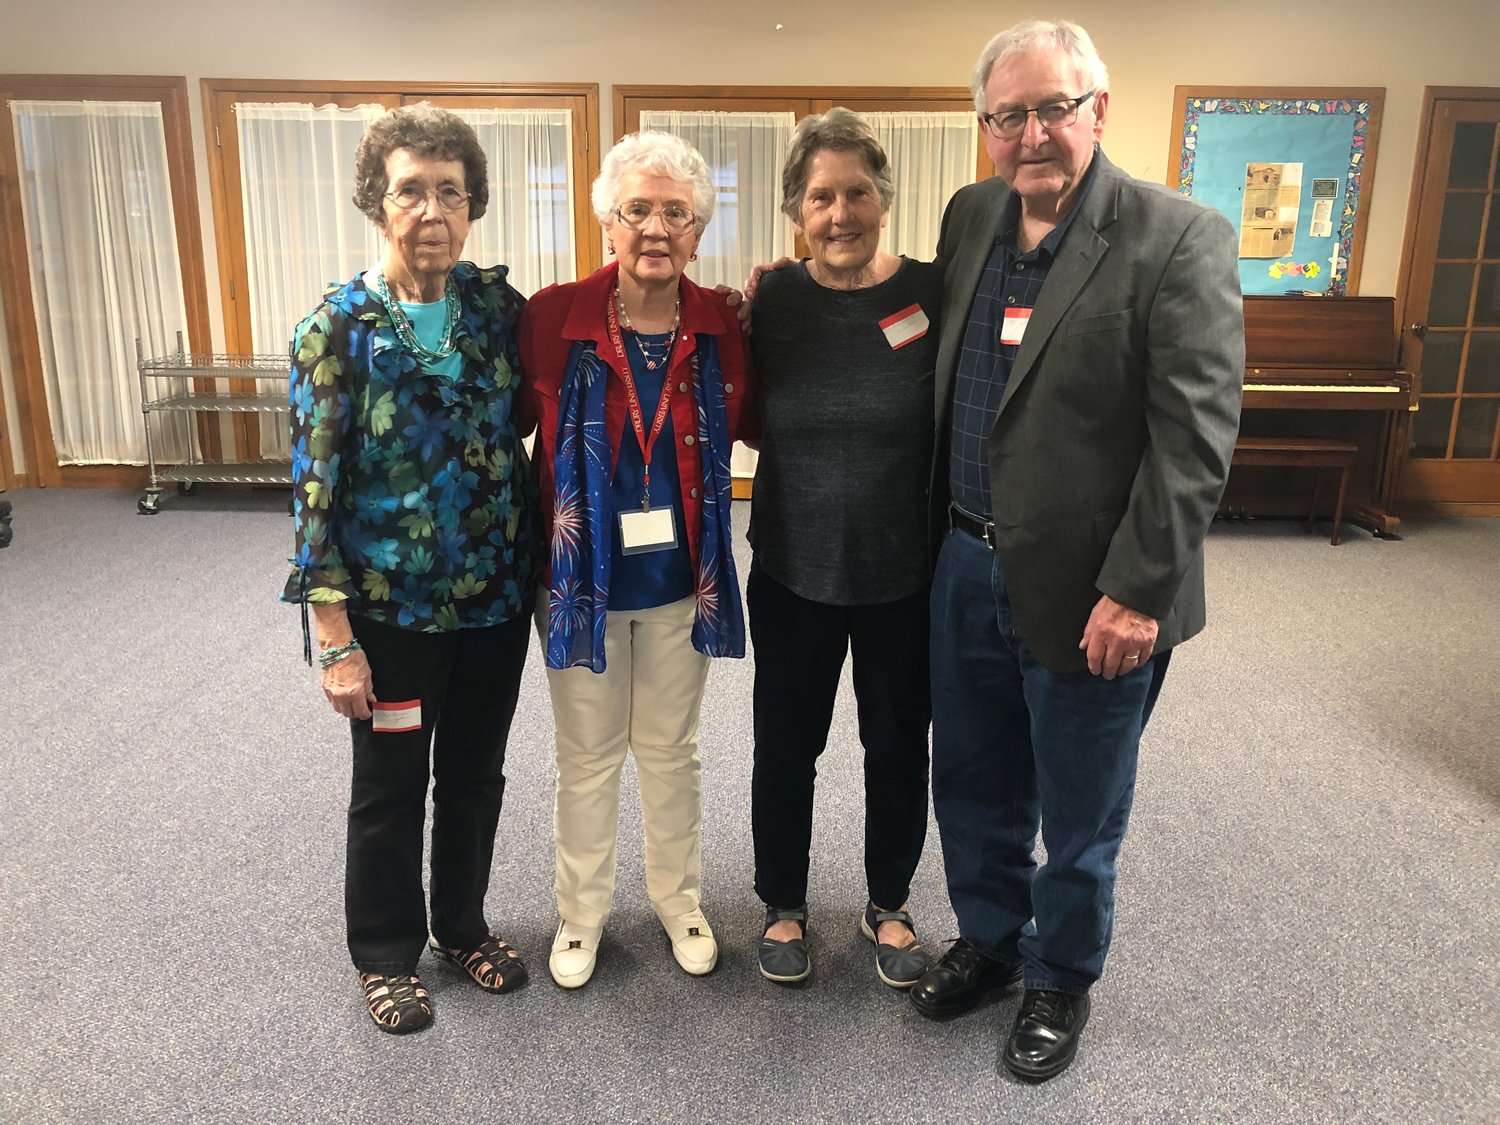 (Left to right) The Elkland class of 1957, Evelyn Cunningham, Darline Dill, Joann Crowder and John Miller.